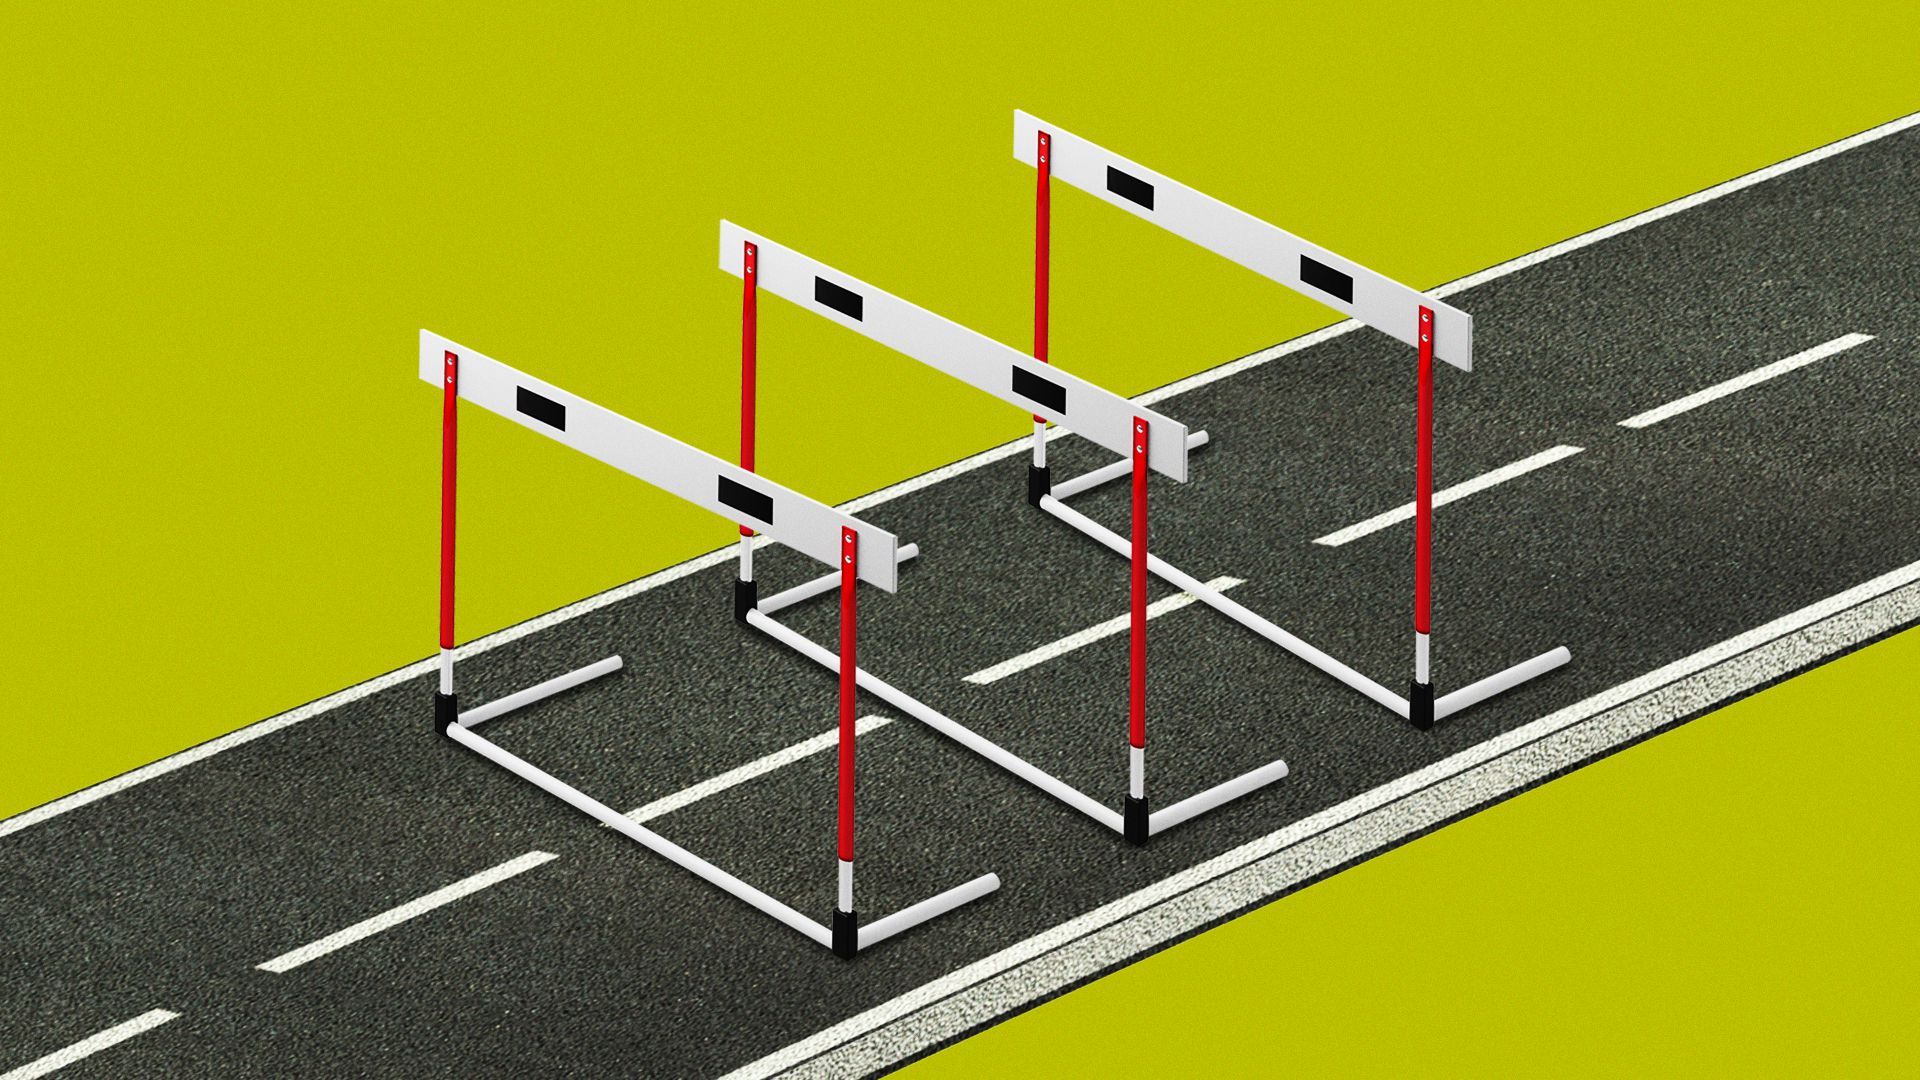 Illustration of a road with multiple track hurdles on a green background.